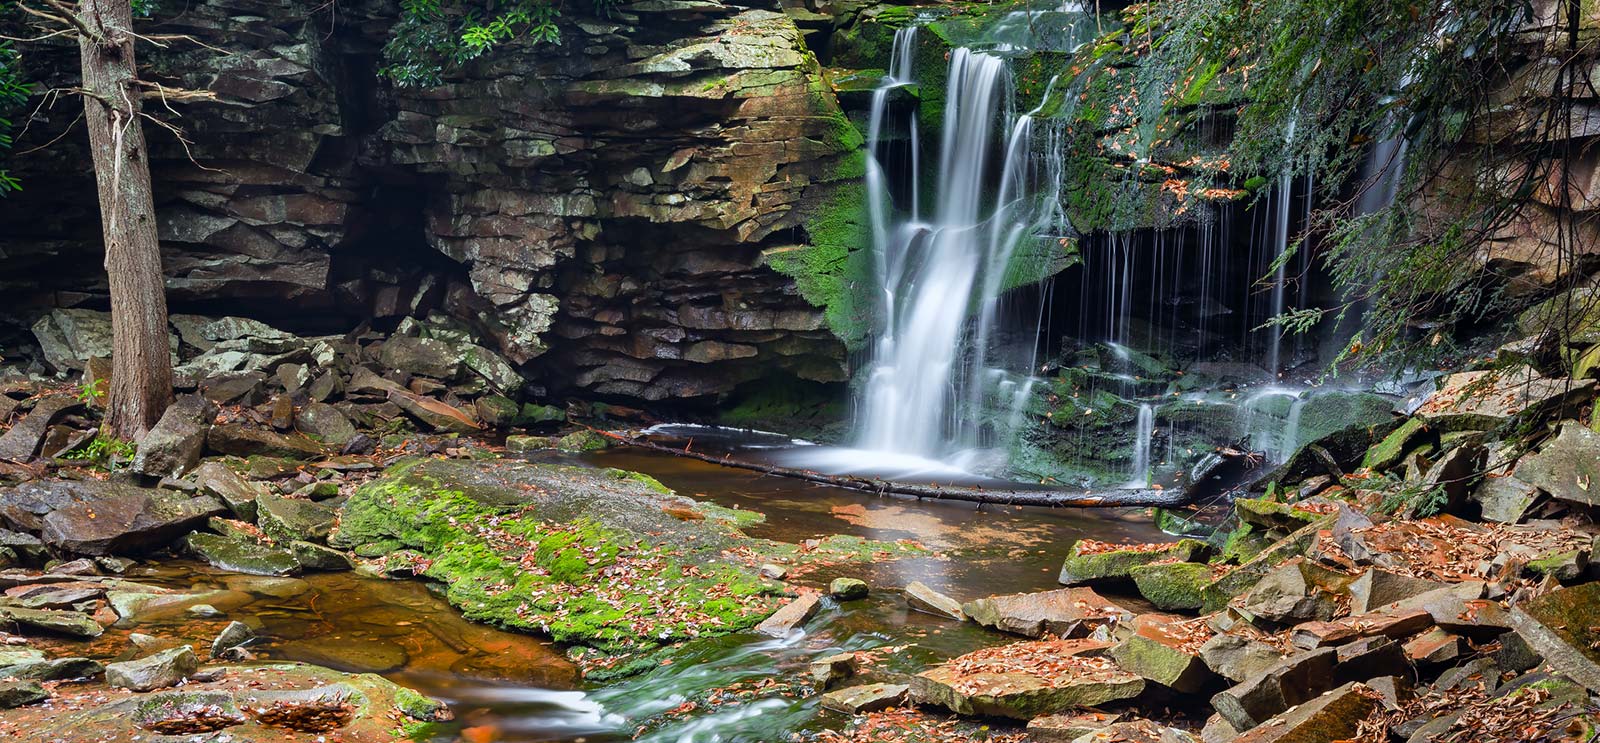 Black Water Falls in Maryland